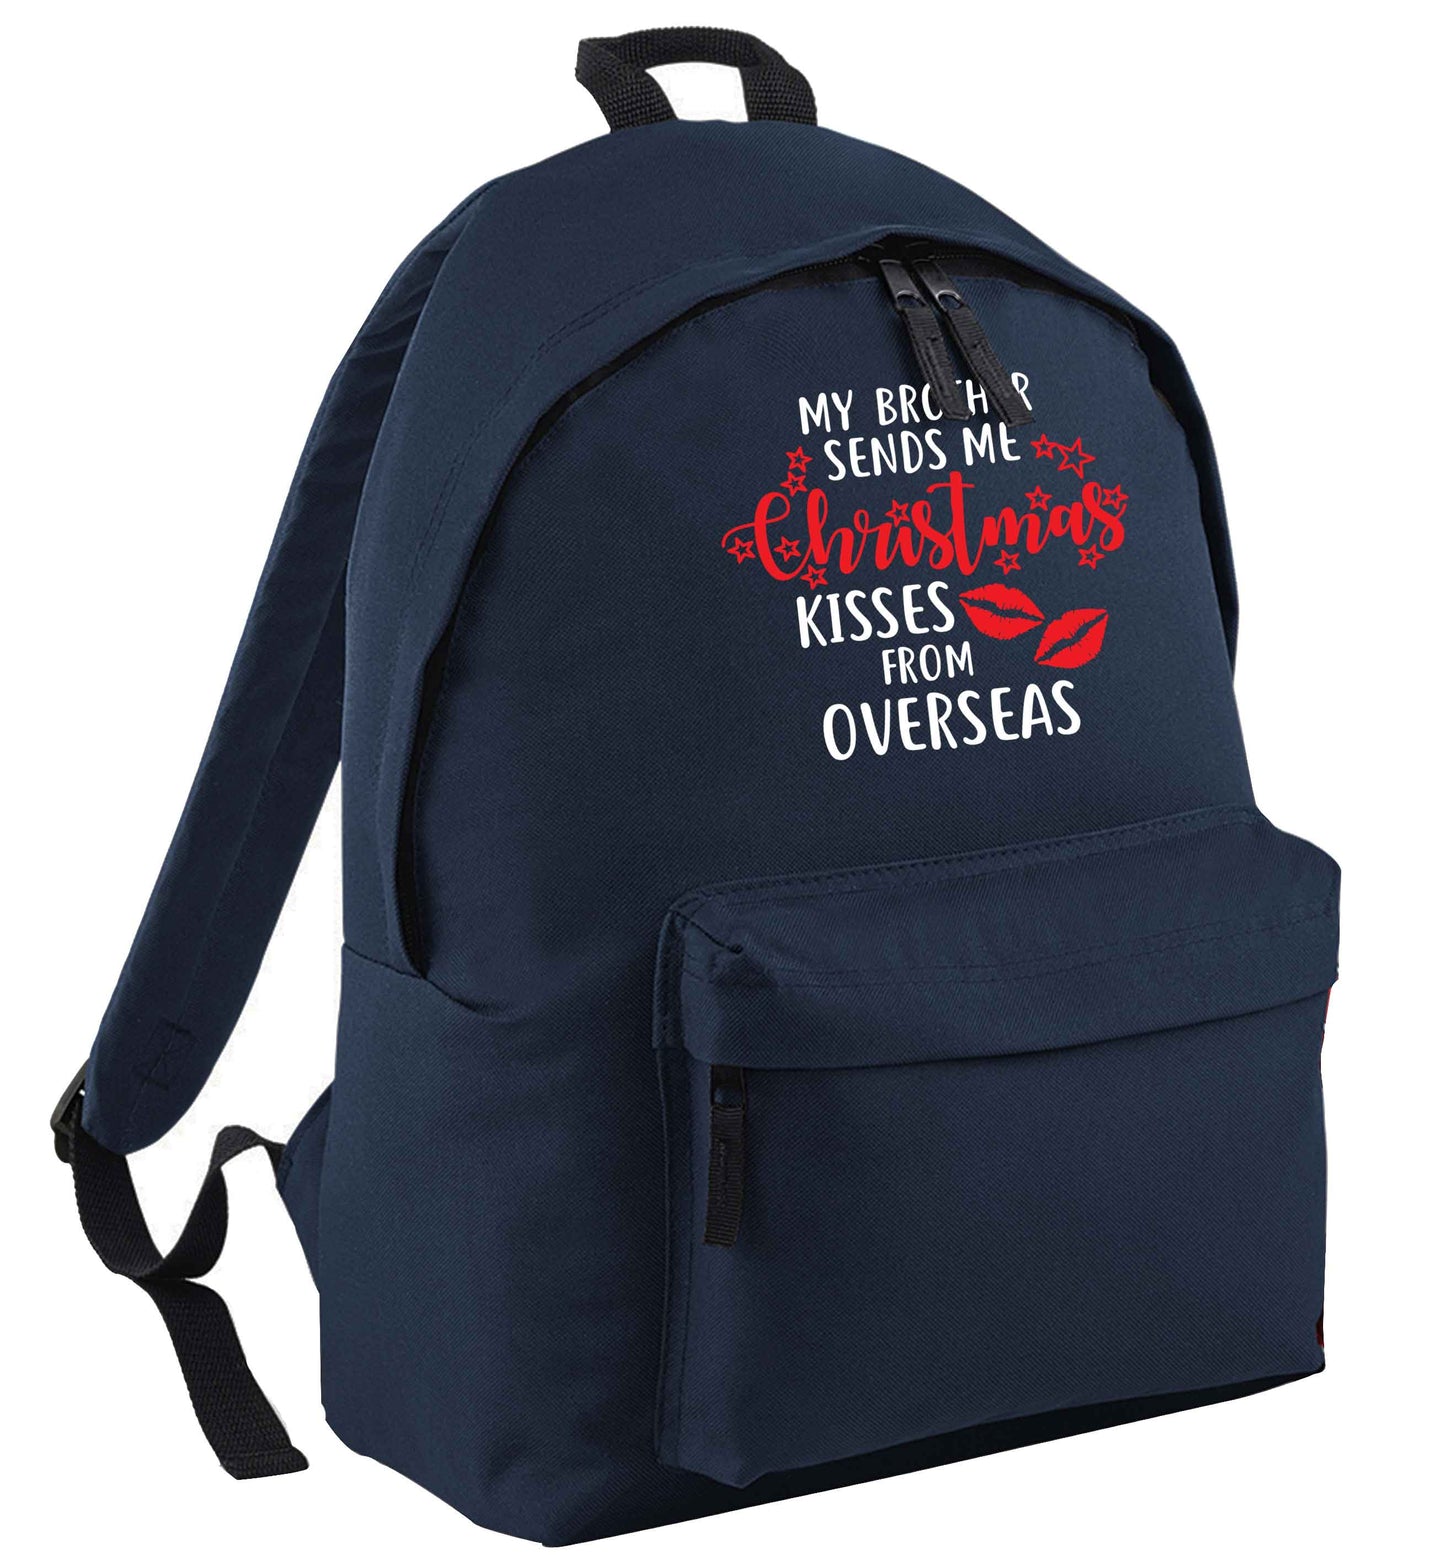 Brother Christmas Kisses Overseas navy adults backpack